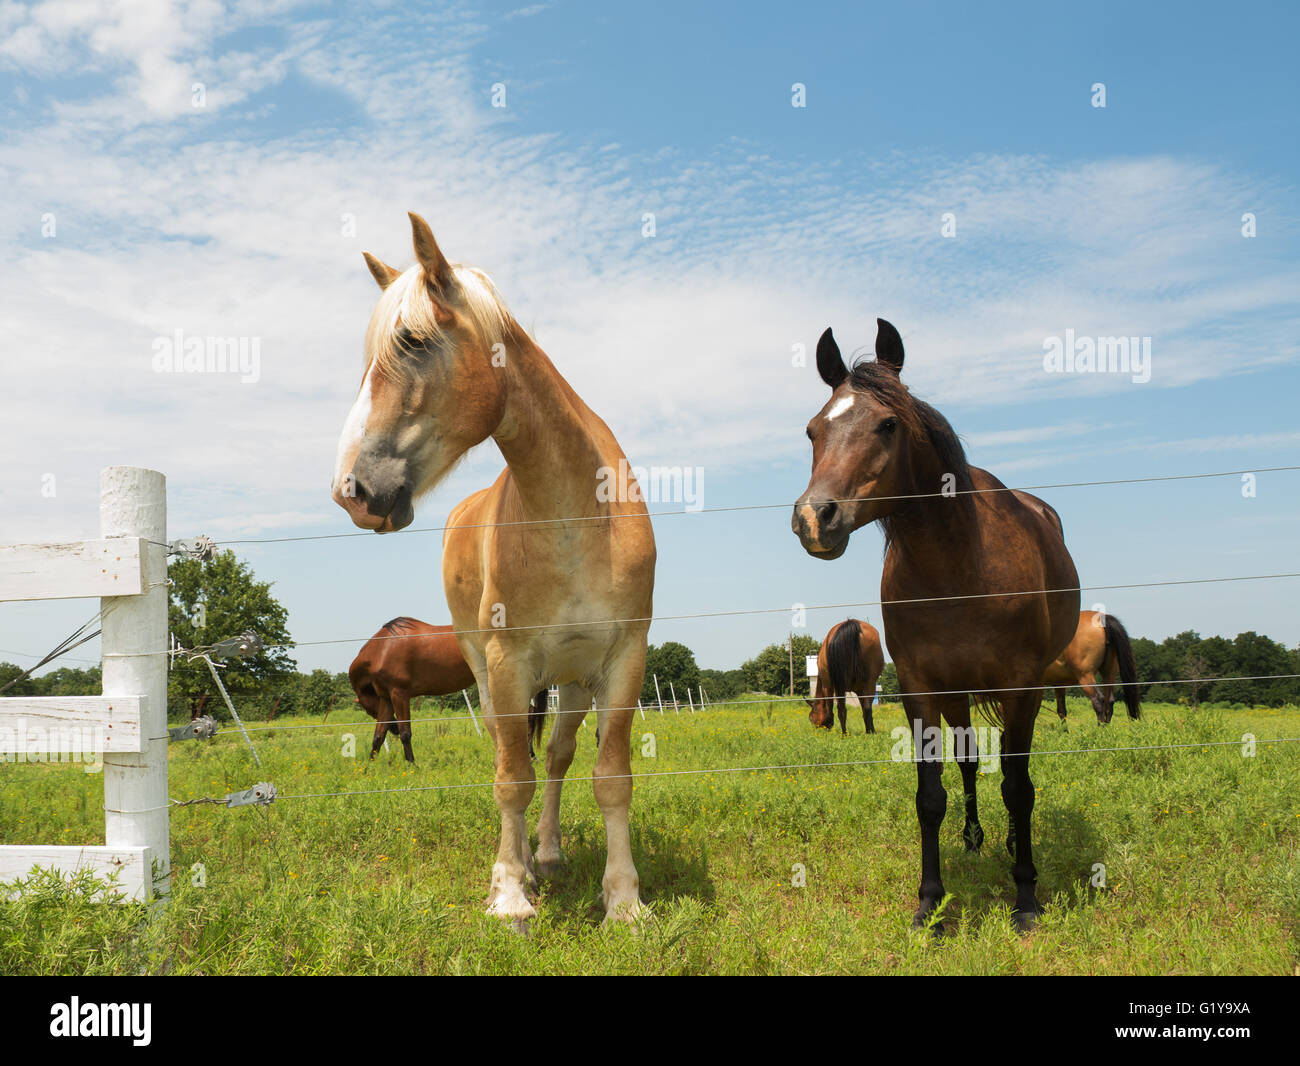 Two horses, big and small, looking over a wire fence Stock Photo